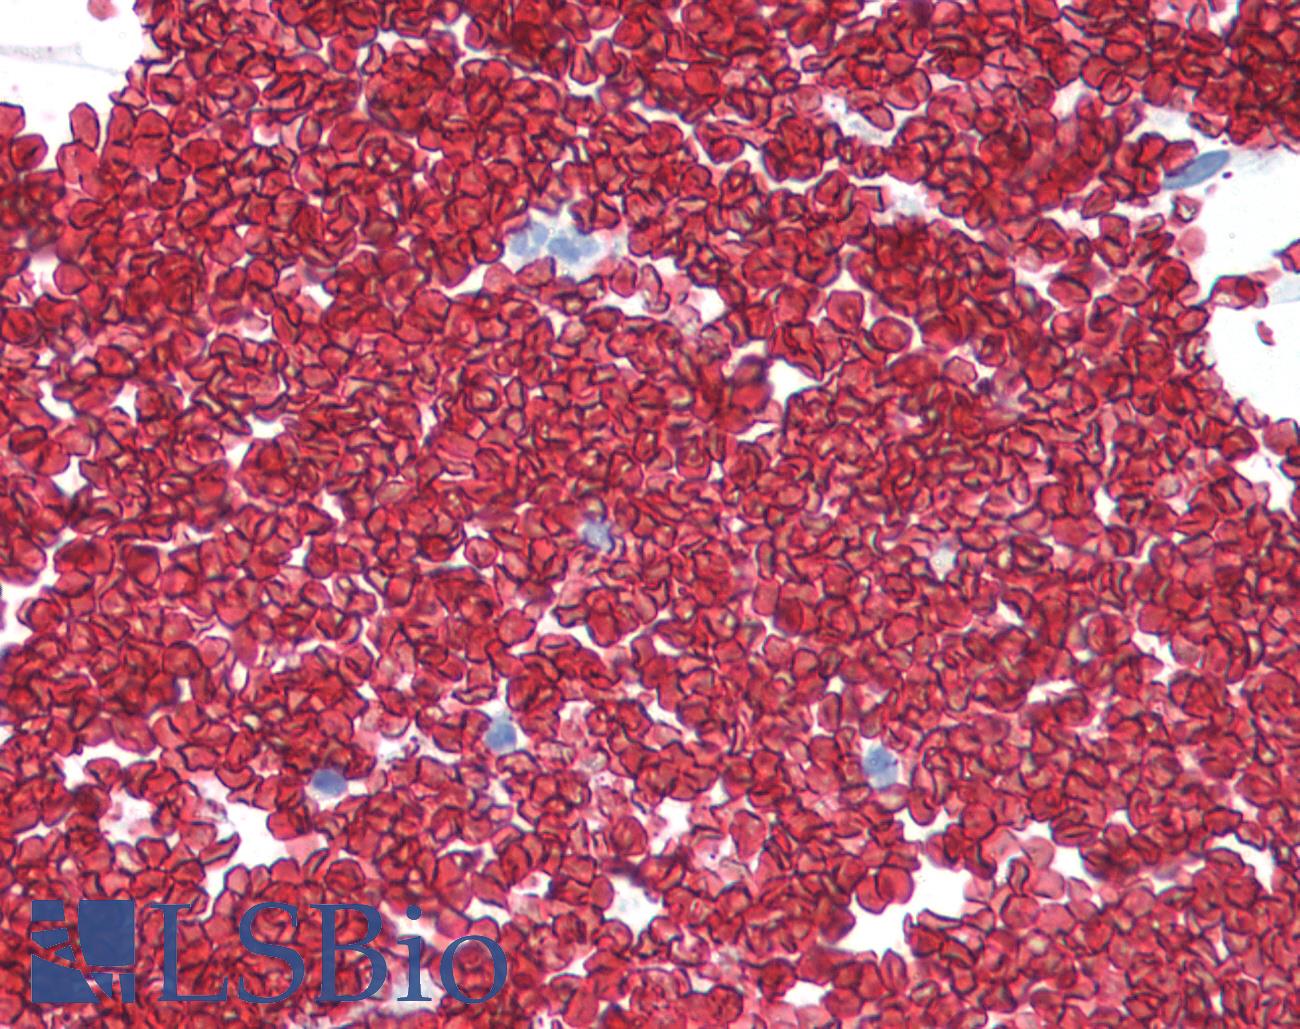 SLC2A1 / GLUT-1 Antibody - Anti-SLC2A1 / GLUT1 antibody IHC of human colon, erythrocytes. Immunohistochemistry of formalin-fixed, paraffin-embedded tissue after heat-induced antigen retrieval. Antibody concentration 5 ug/ml.